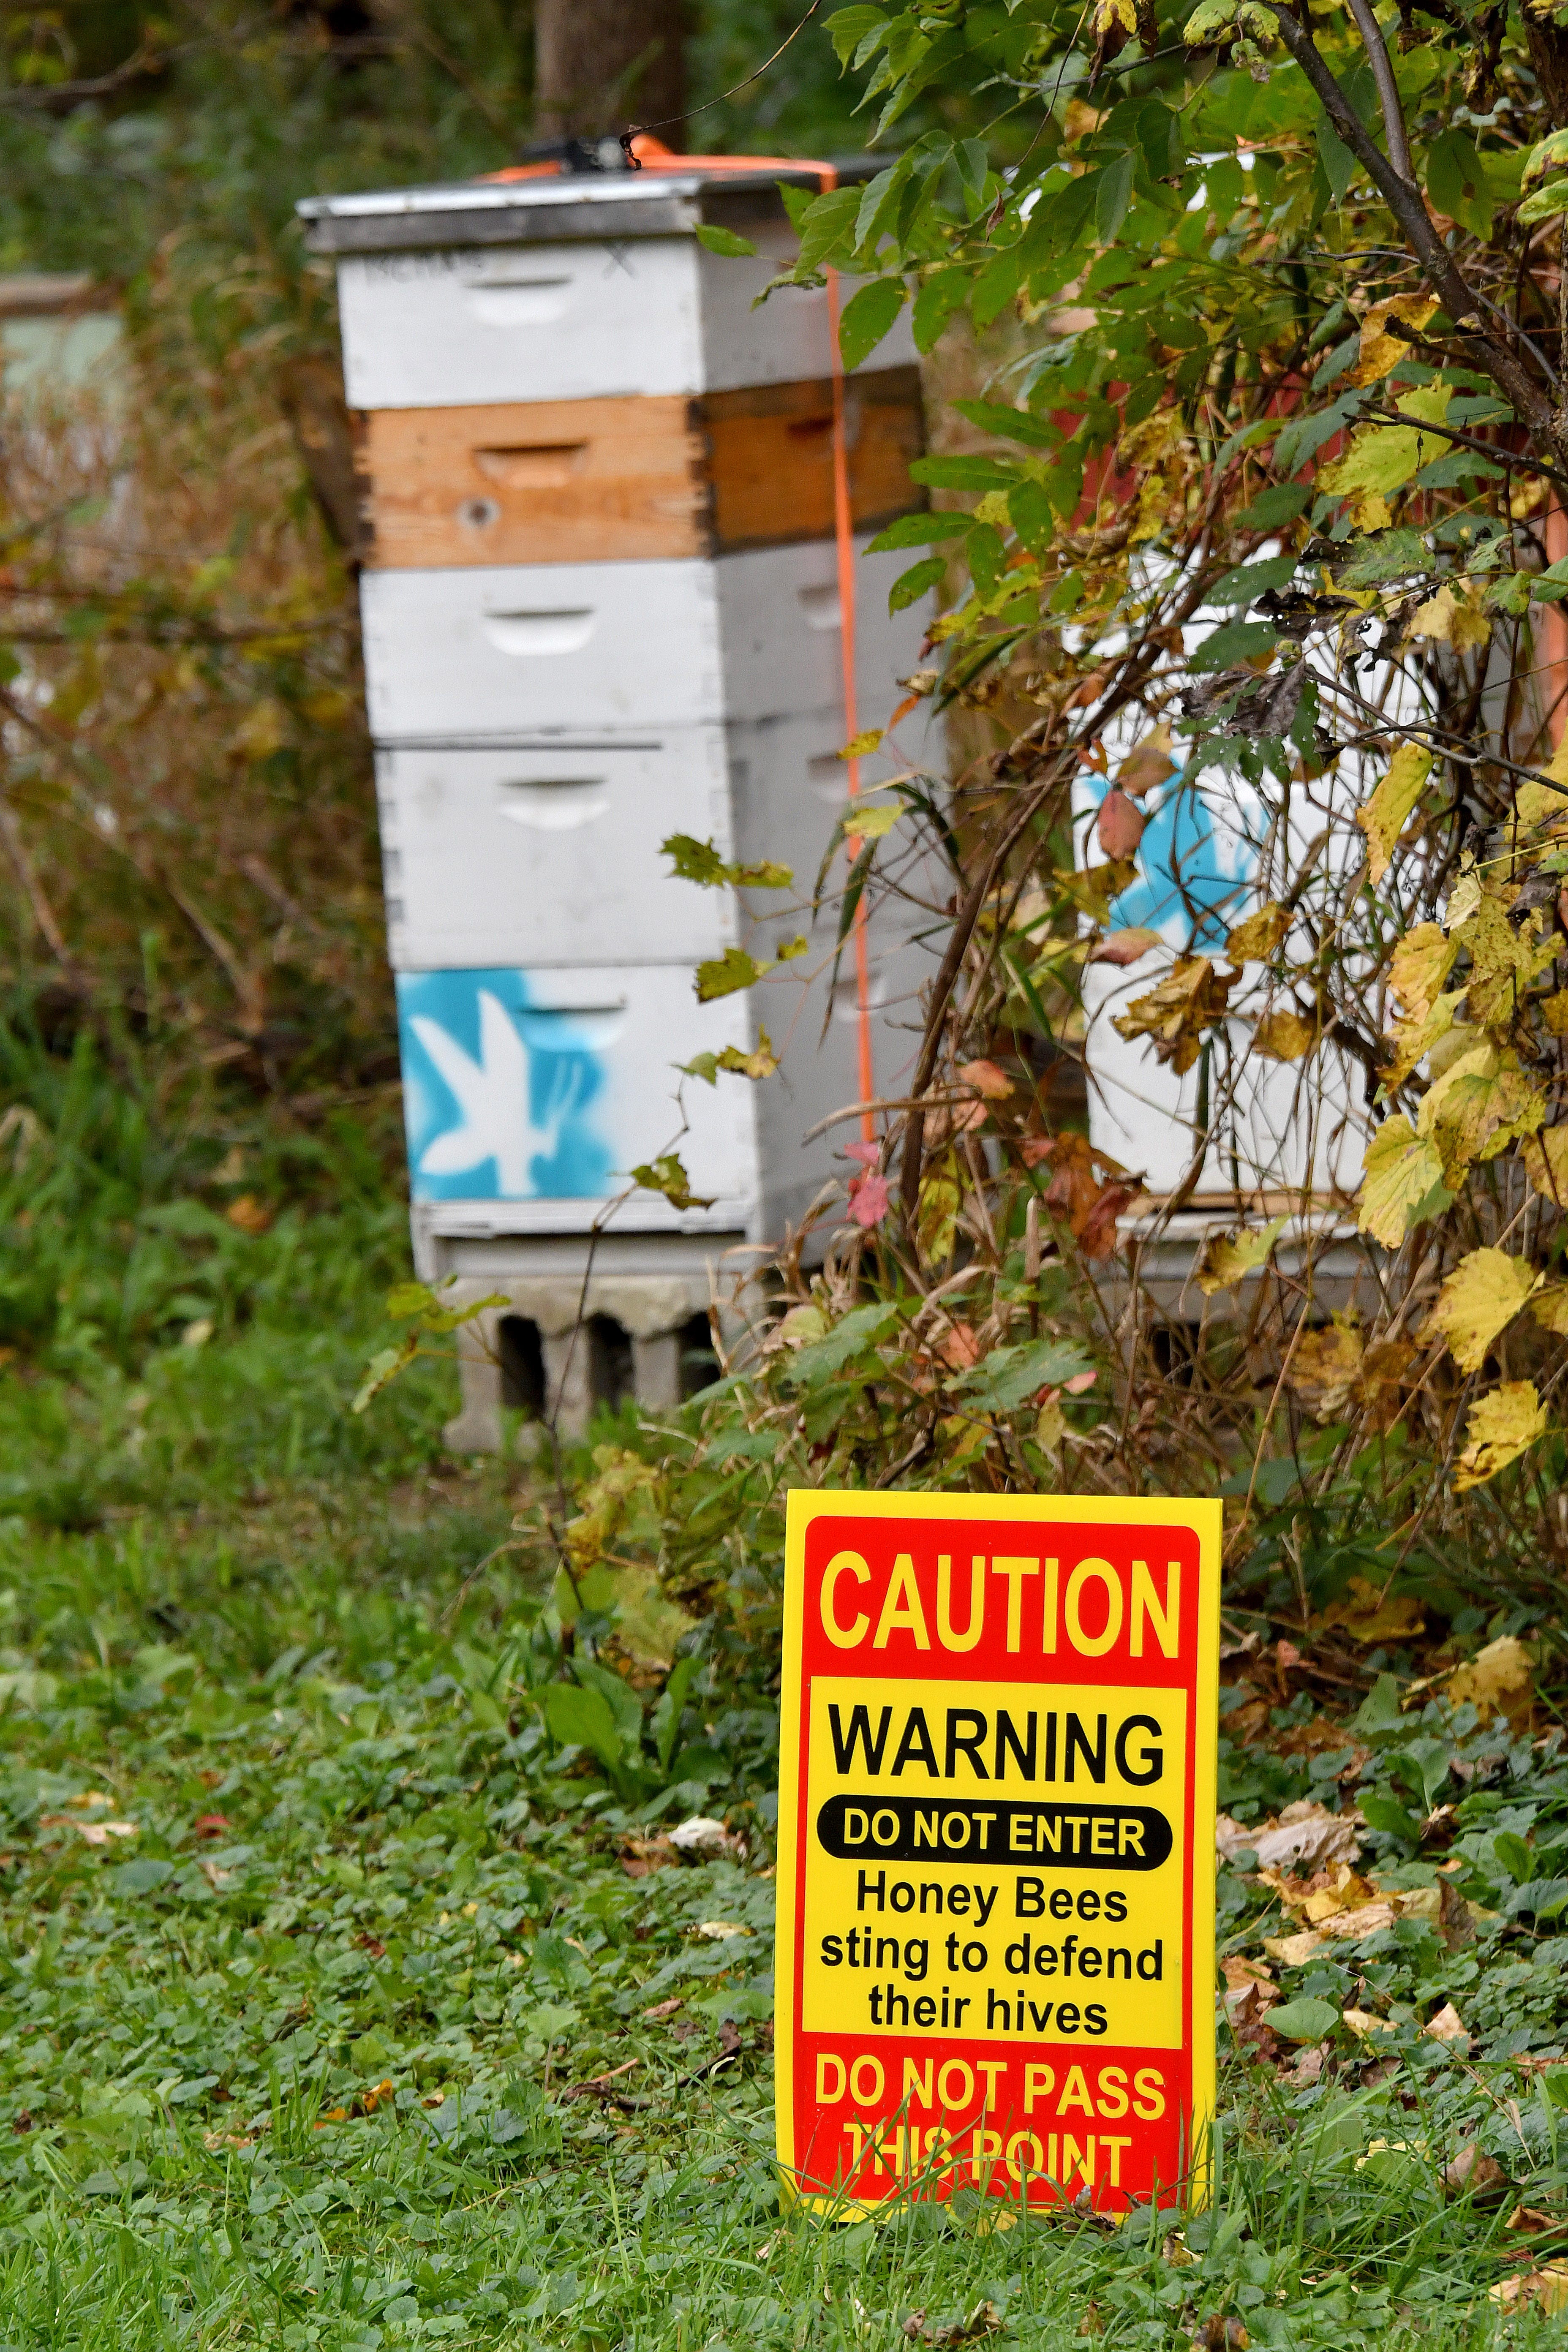 Signs warn casual visitors away from hives of honey bees in this Lansing neighborhood.